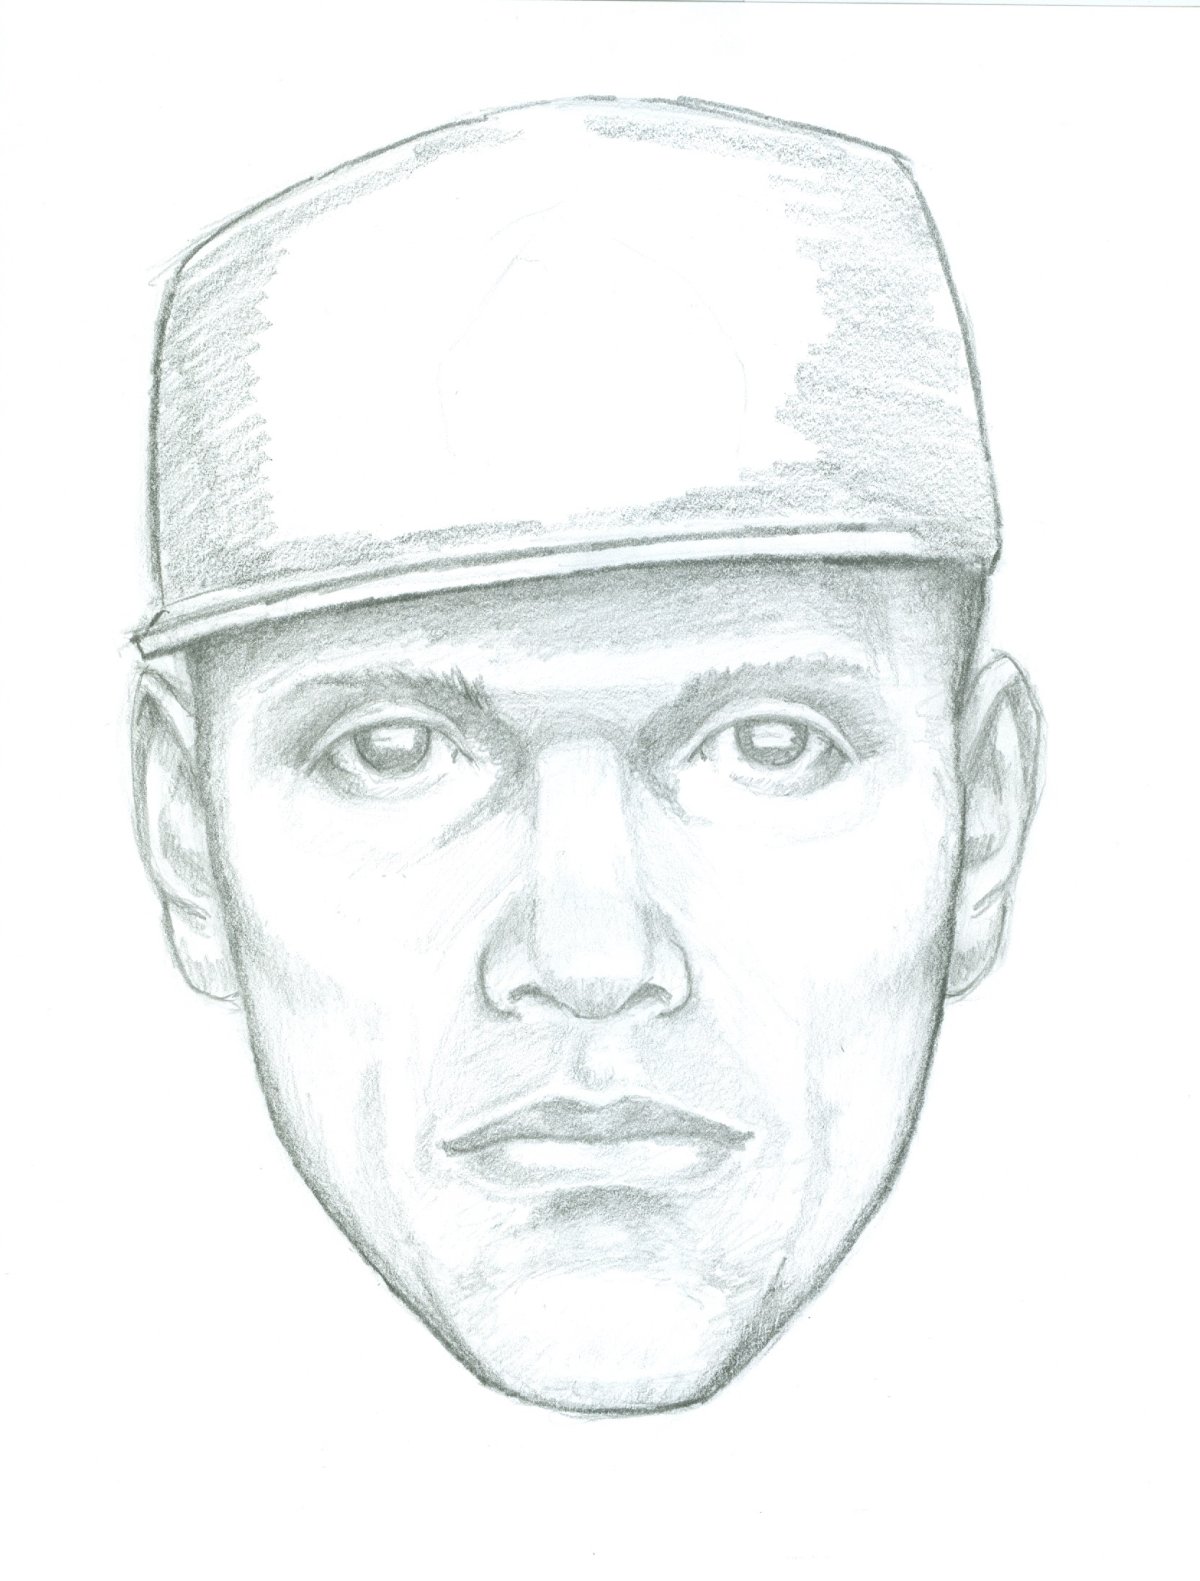 Surrey assault and robbery suspect